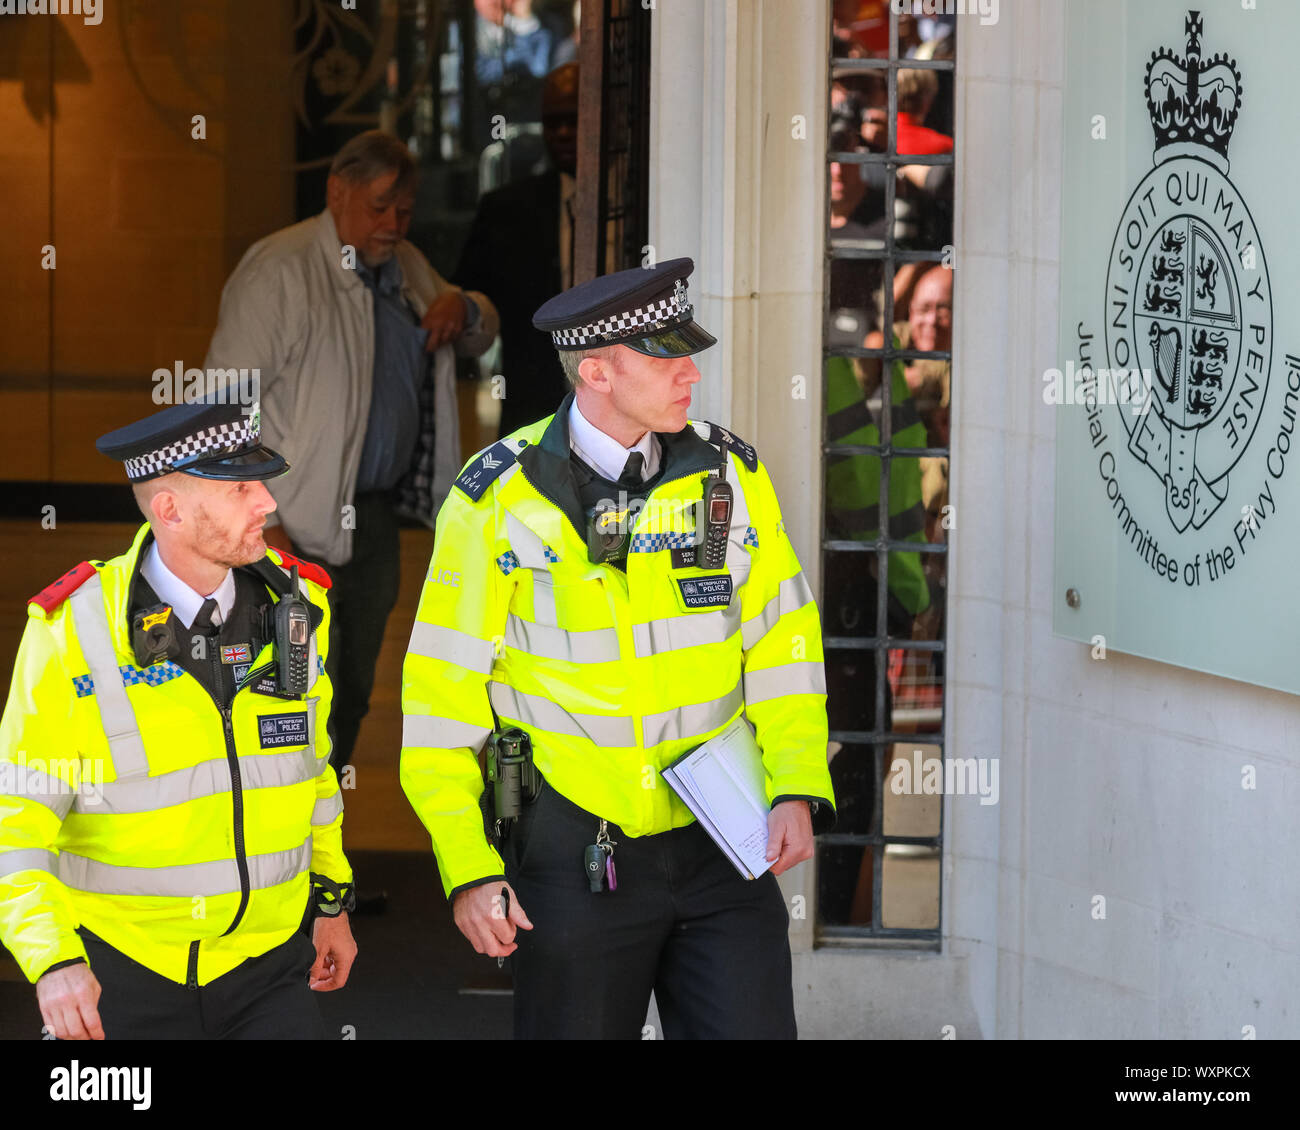 Westminster, London, UK, 17th Sep 2019. A large police presence ensures the safety of those inside and outside the building. The first day of the Supreme Court case over the suspension of Parliament, brought by lawyer Gina Miller who joined forces with former British PM John Major. The case will be heard over three days from today. Stock Photo